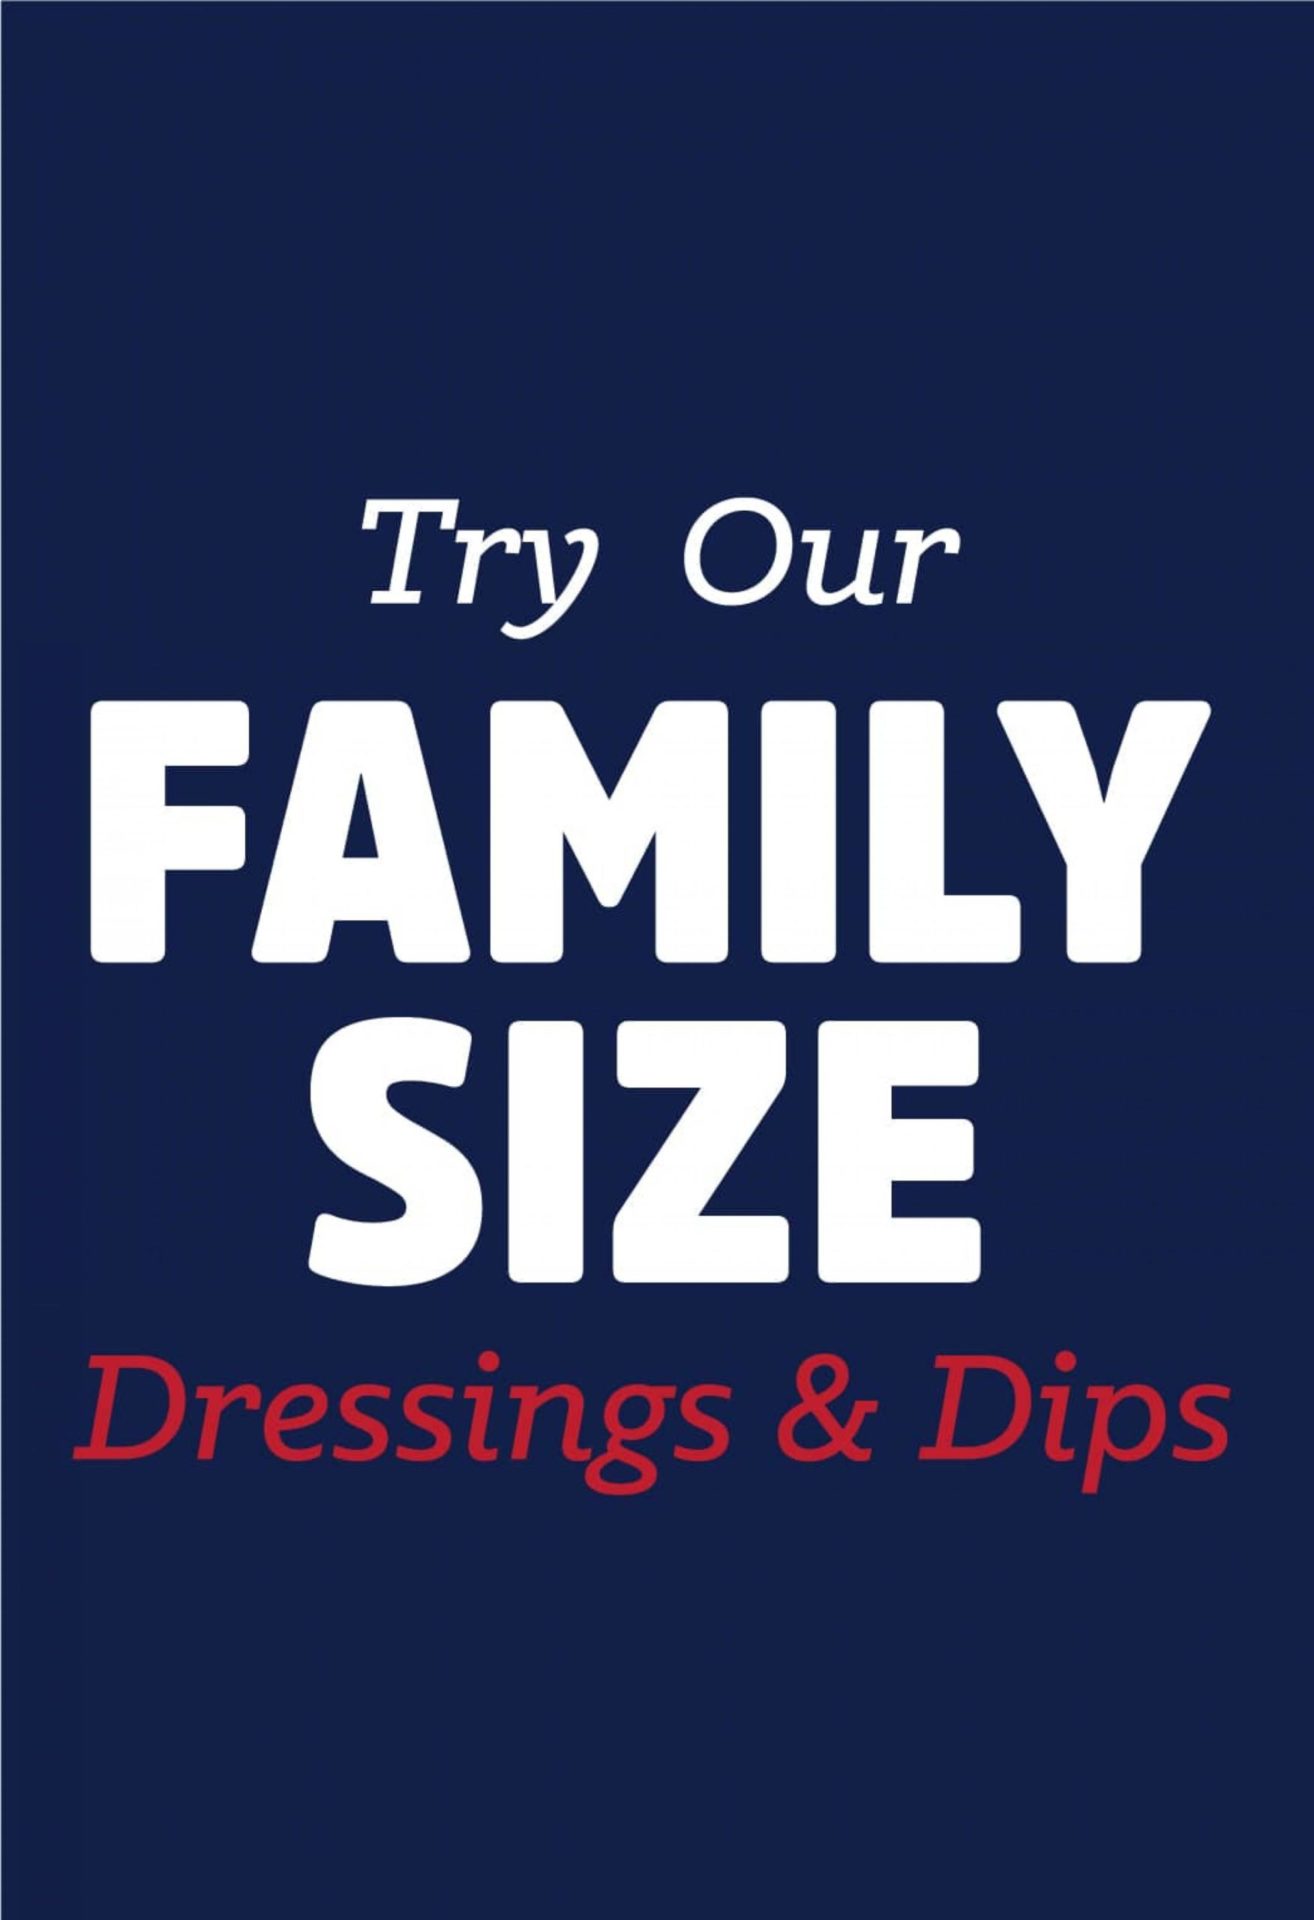 Try Our FAMILY SIZE Dressings & Dips